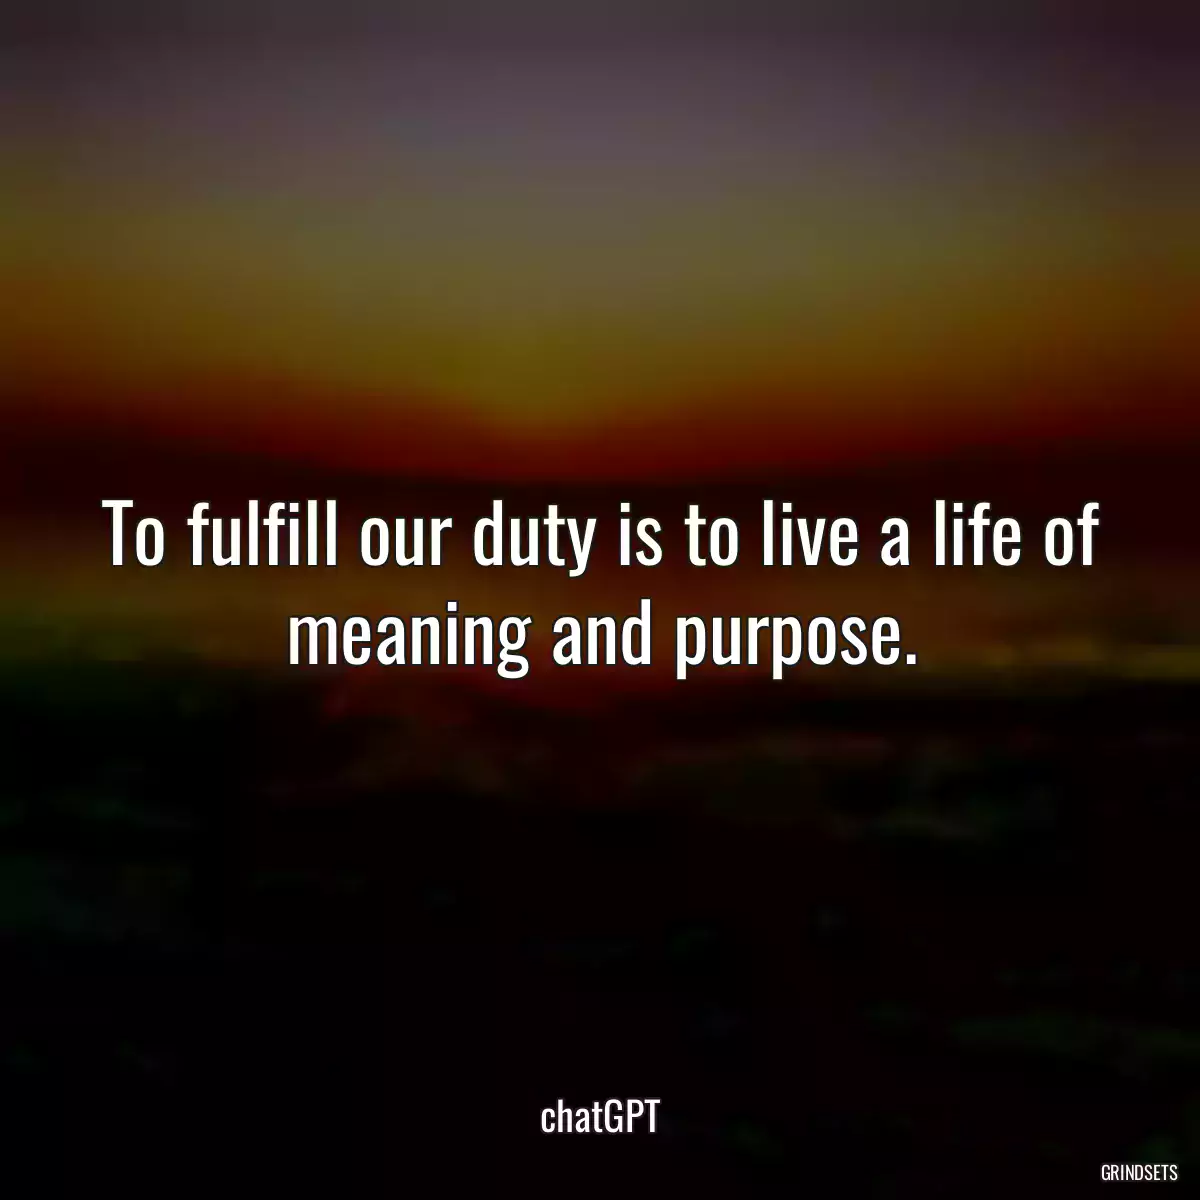 To fulfill our duty is to live a life of meaning and purpose.